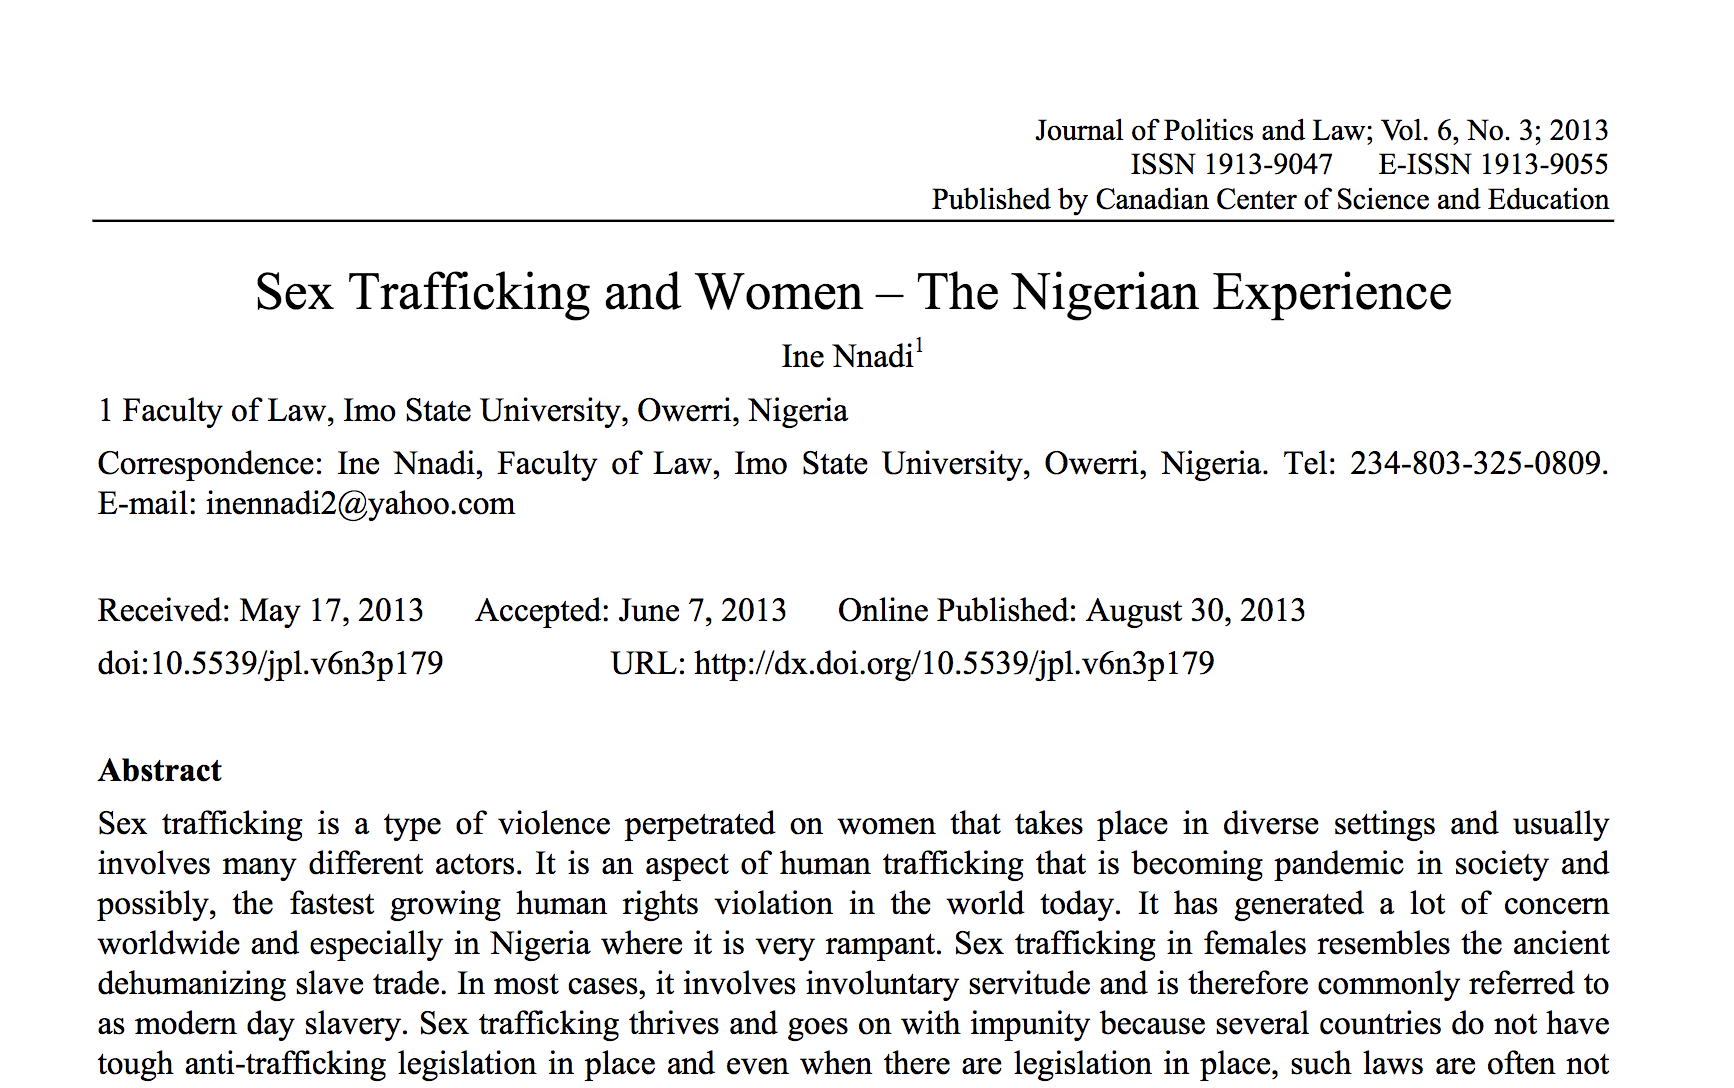 Sex trafficking and women: the Nigerian experience